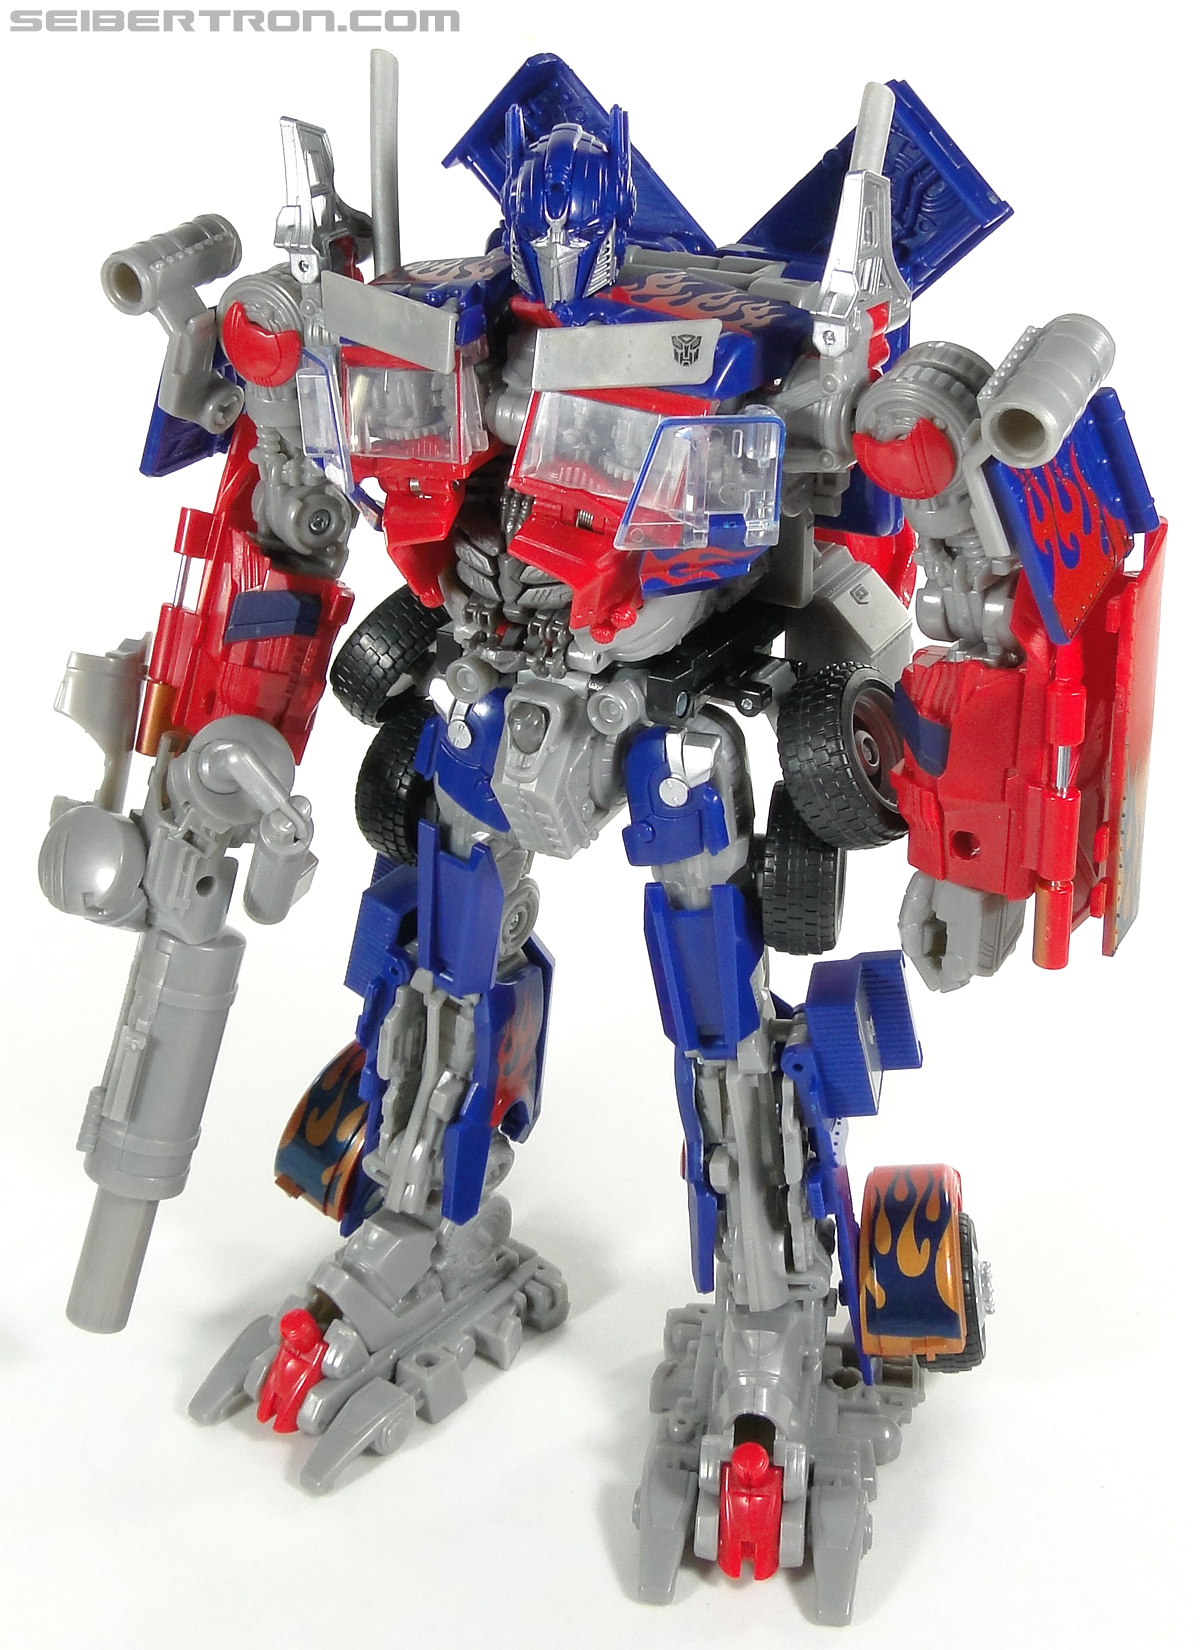 Transformers Dark of the Moon Jetwing Optimus Prime (Image #178 of 300)